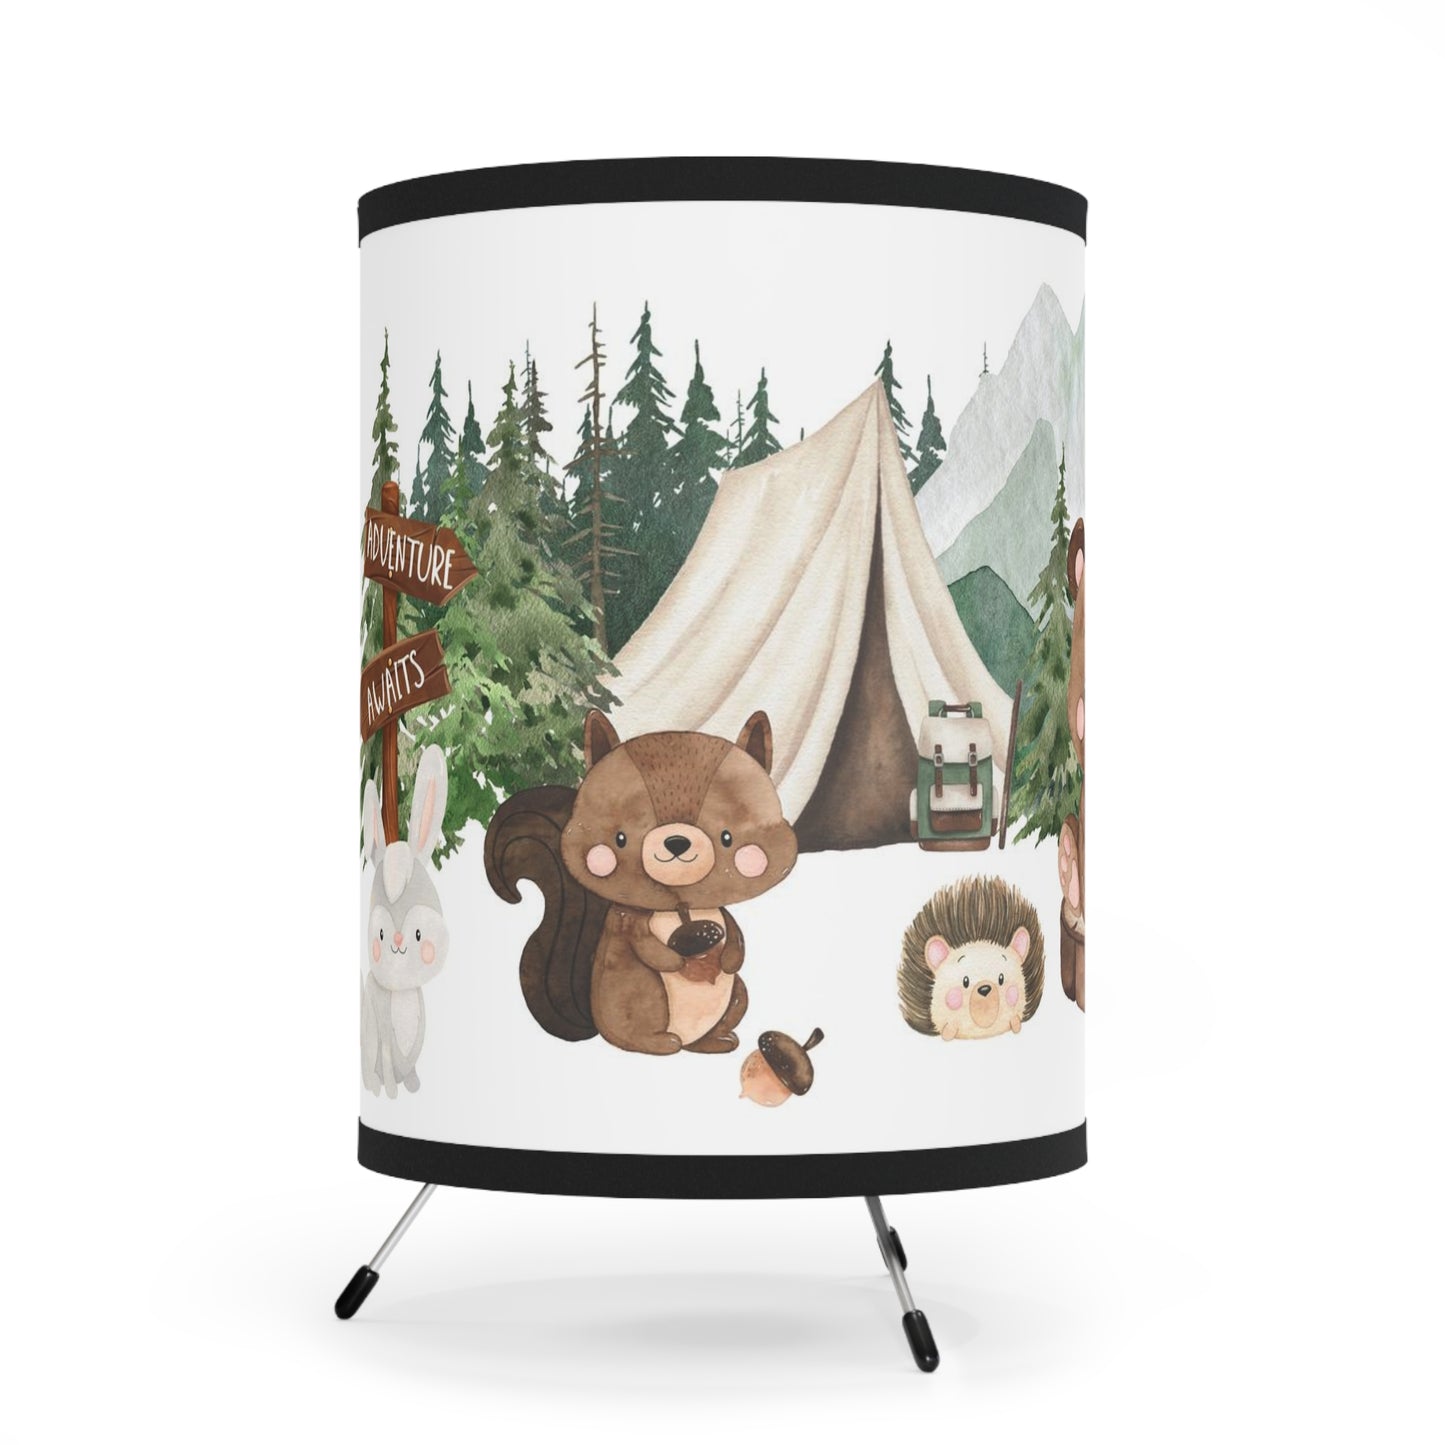 Woodland nursery lamp, Forest table lamp - Camping Critters